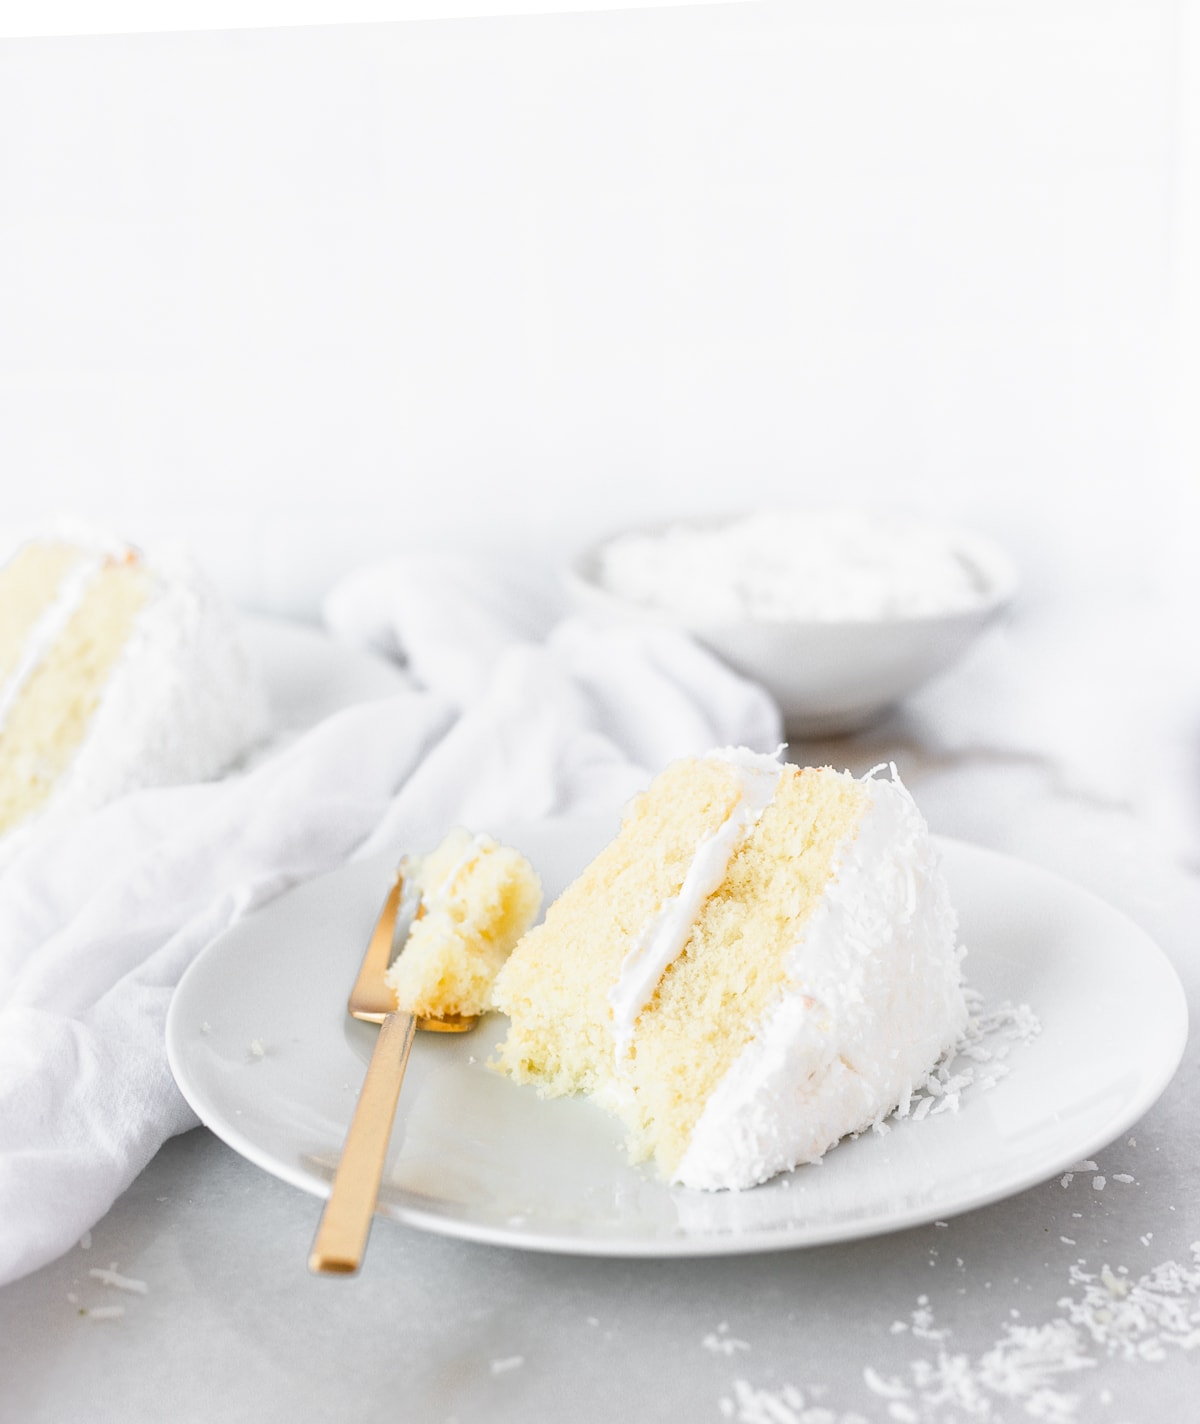 Grandpa's Favorite Coconut Cake with 7 minute frosting